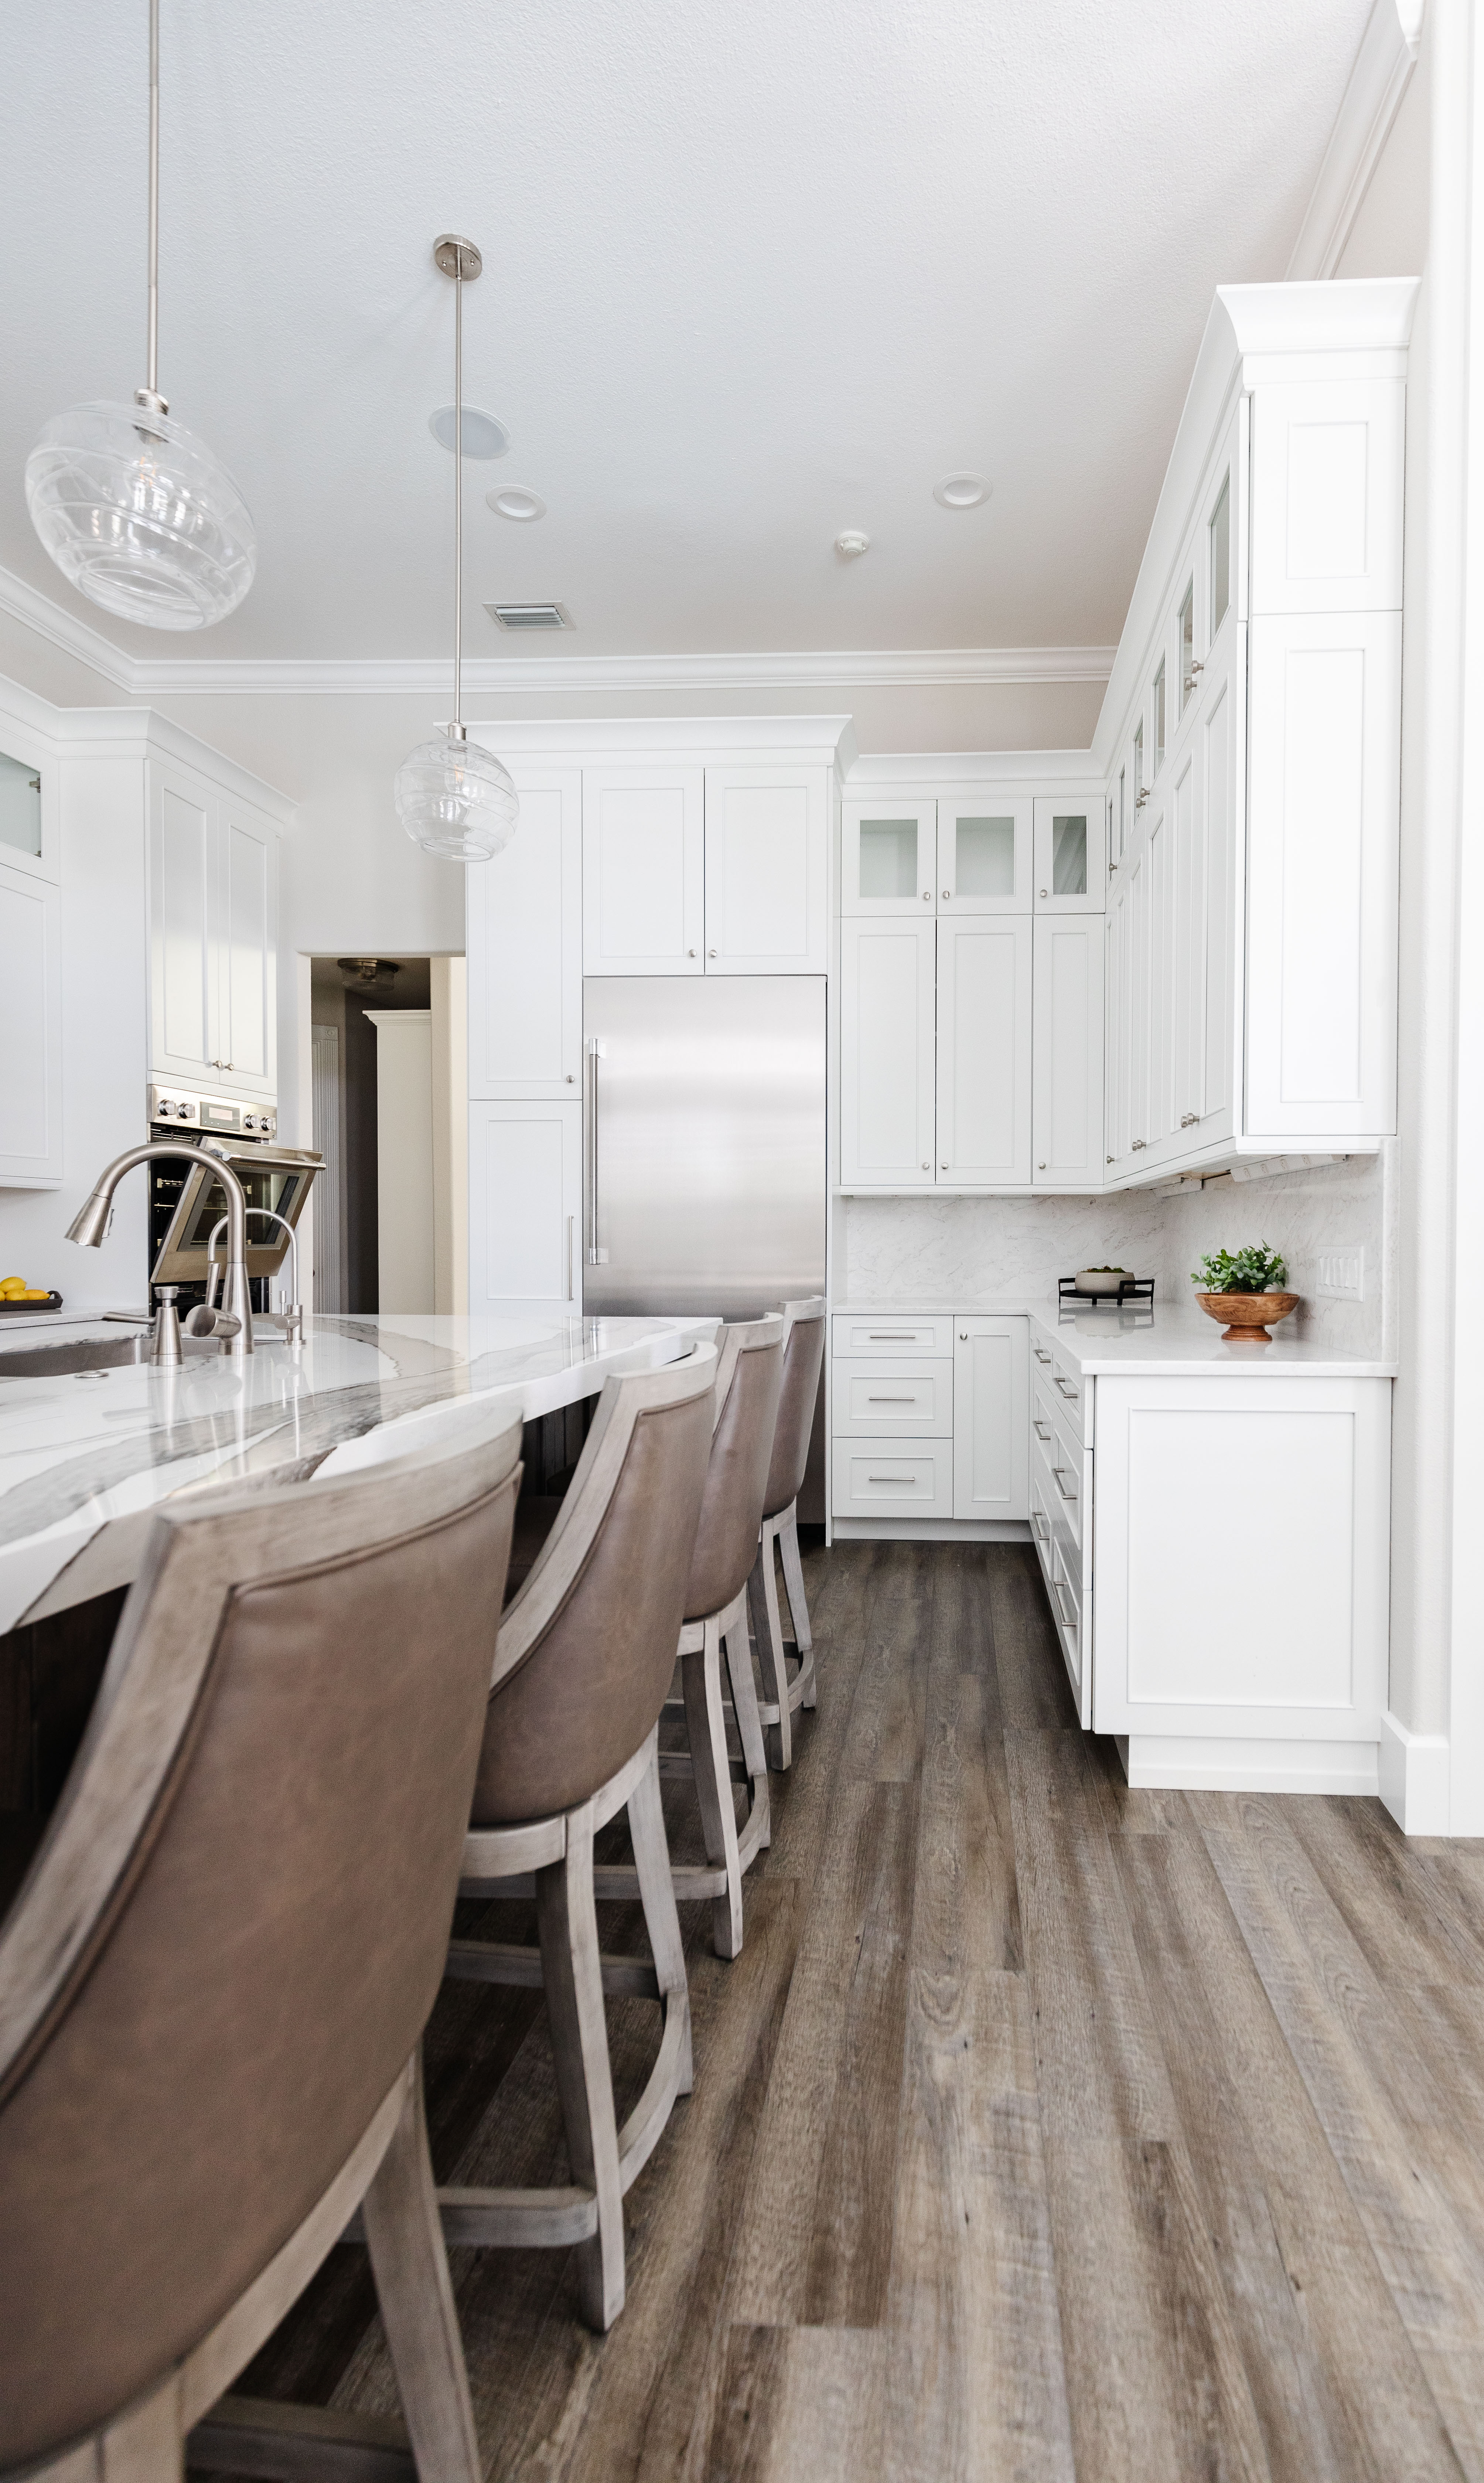 A classic kitchen design with white painted kitchen cabinetry and a large knotty alder kitchen island.